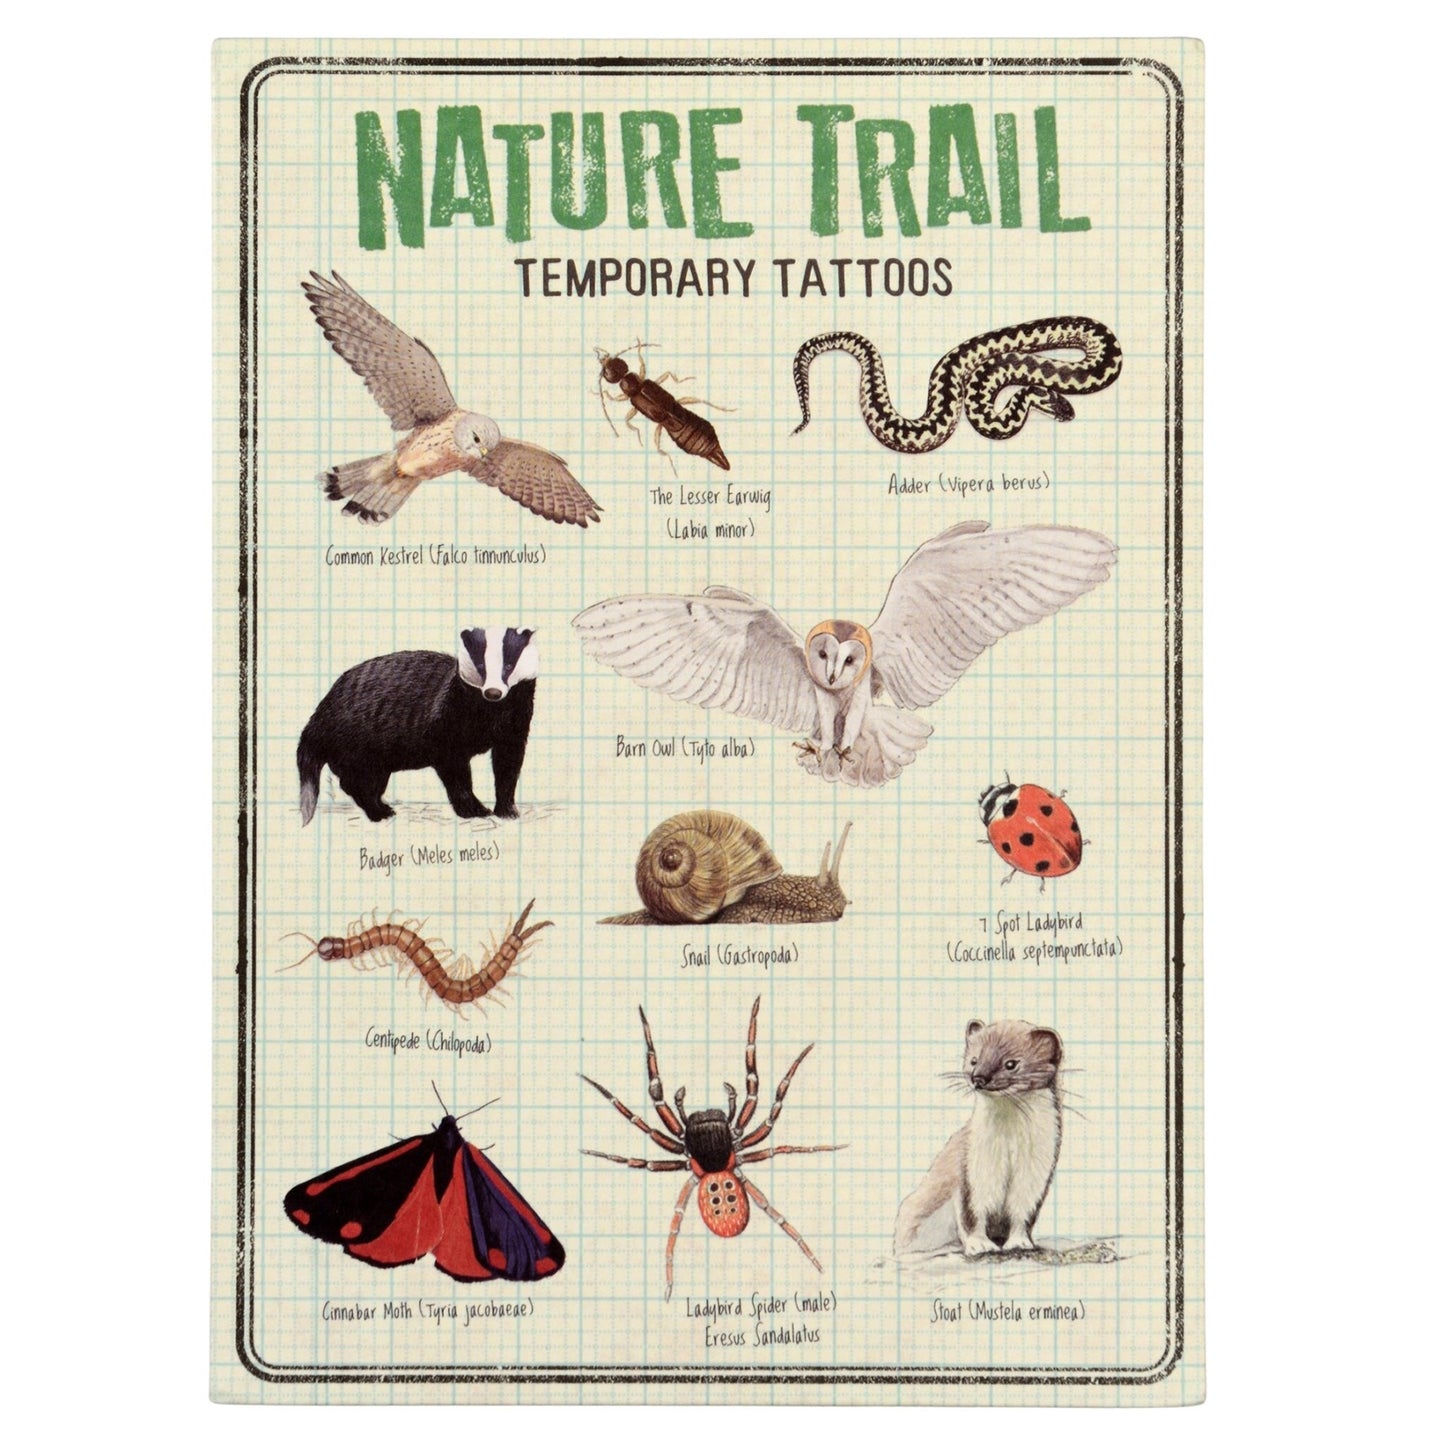 Rex London - Temporary Tattoos - Nature Trail - Playlaan